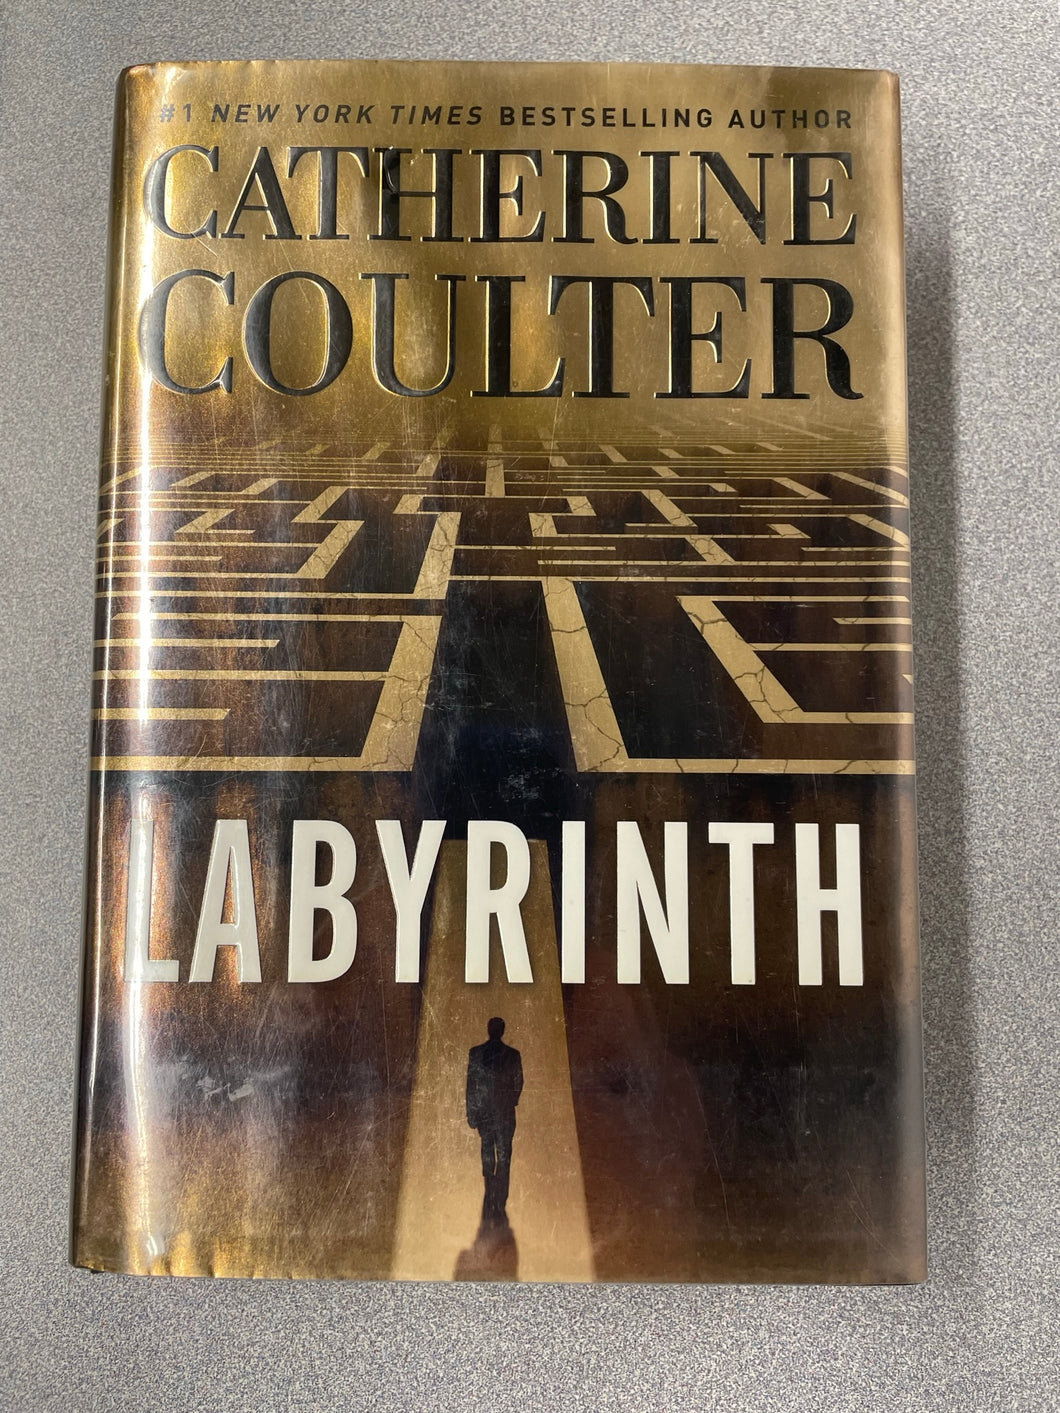 Coulter, Catherine, Labyrinth [2019] MY 6/23